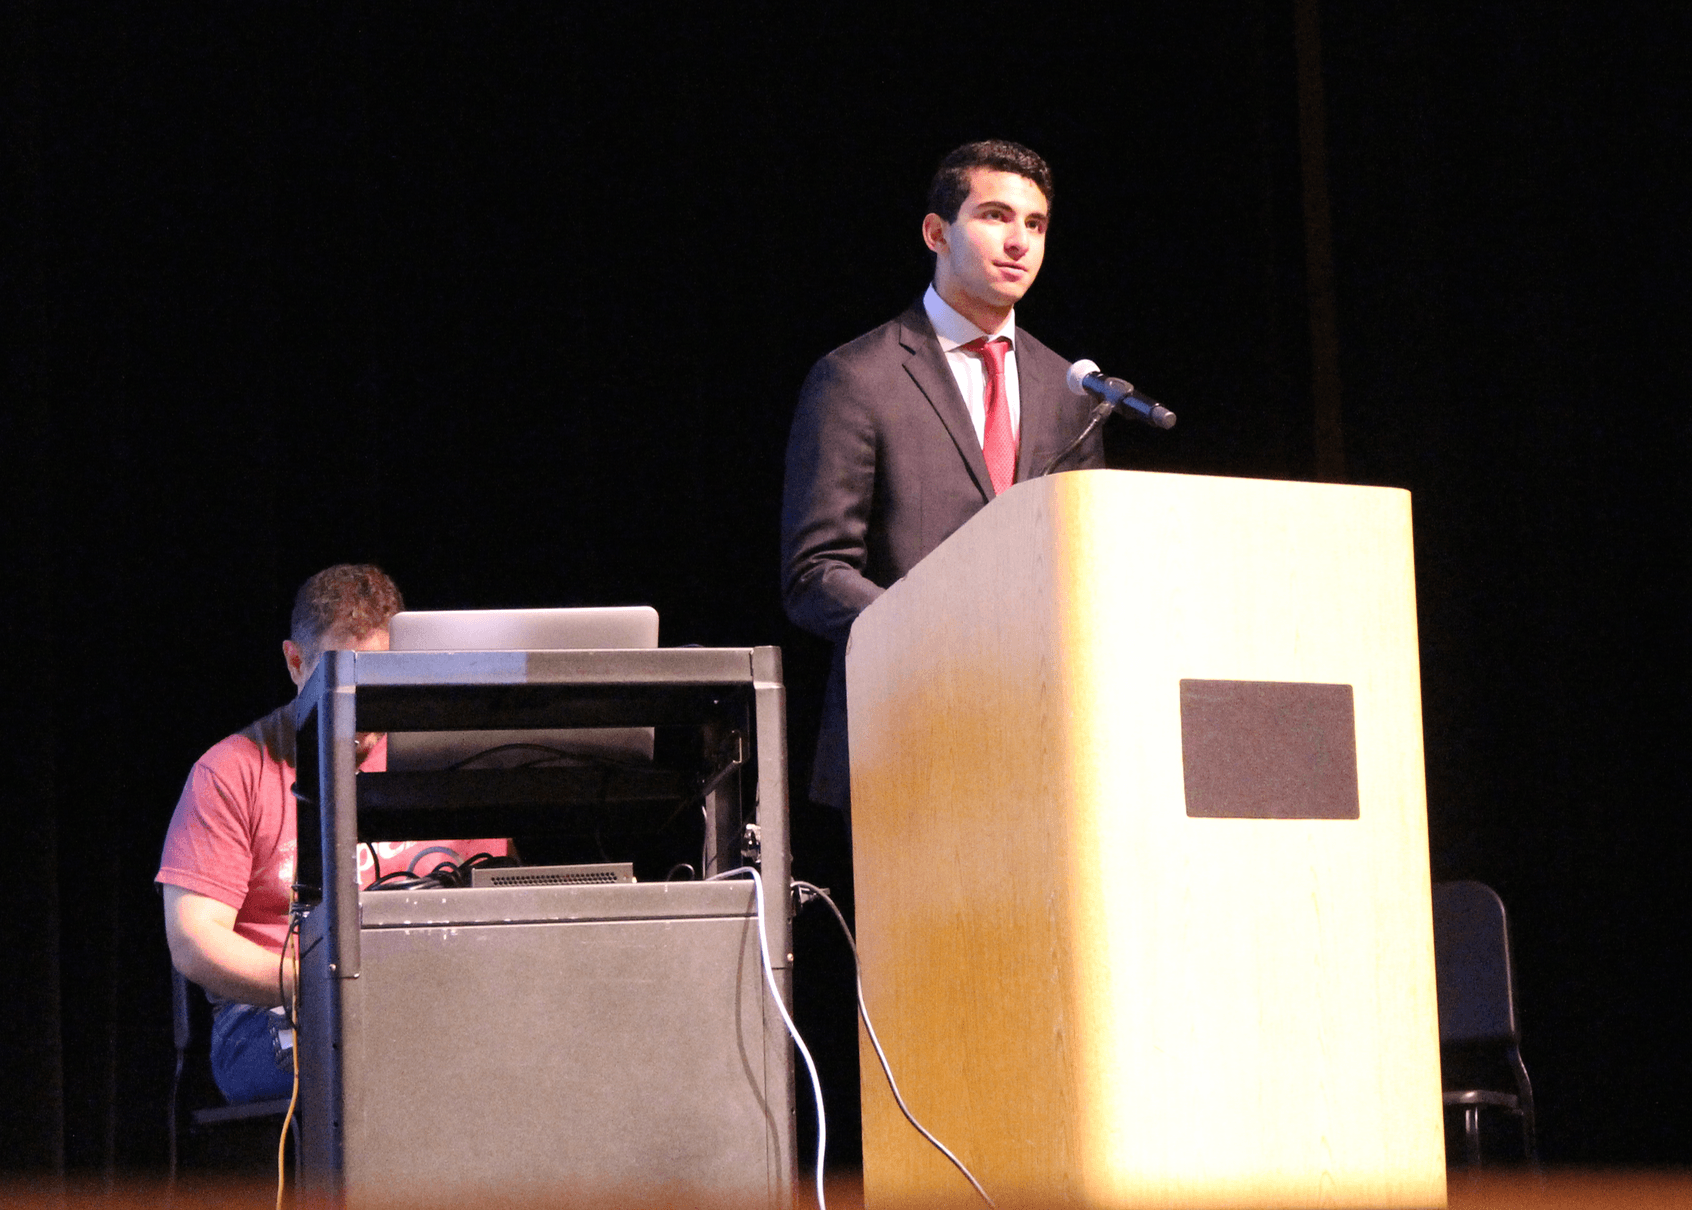 GHS student body president Zane Khader at convocation. Aug 23, 2019 Photo: Leslie Yager